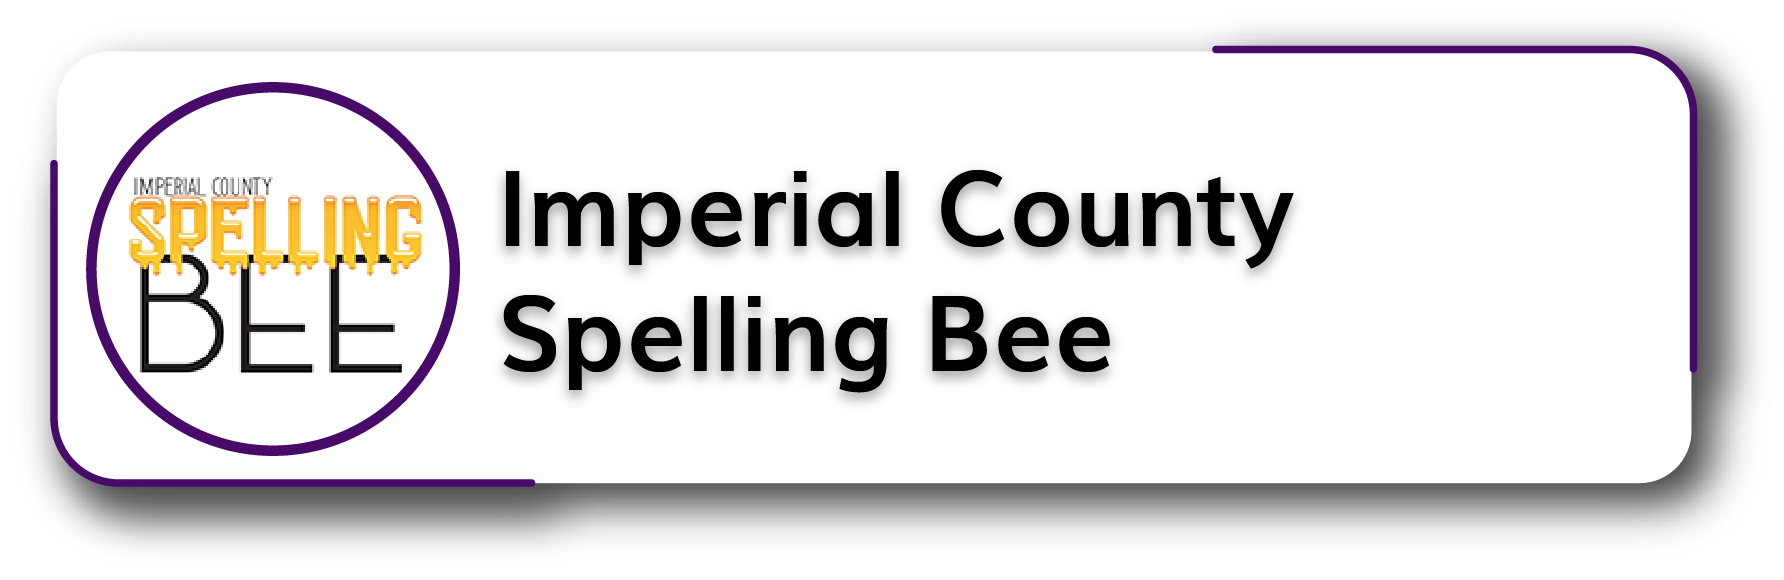 Imperial County Spelling Bee Button